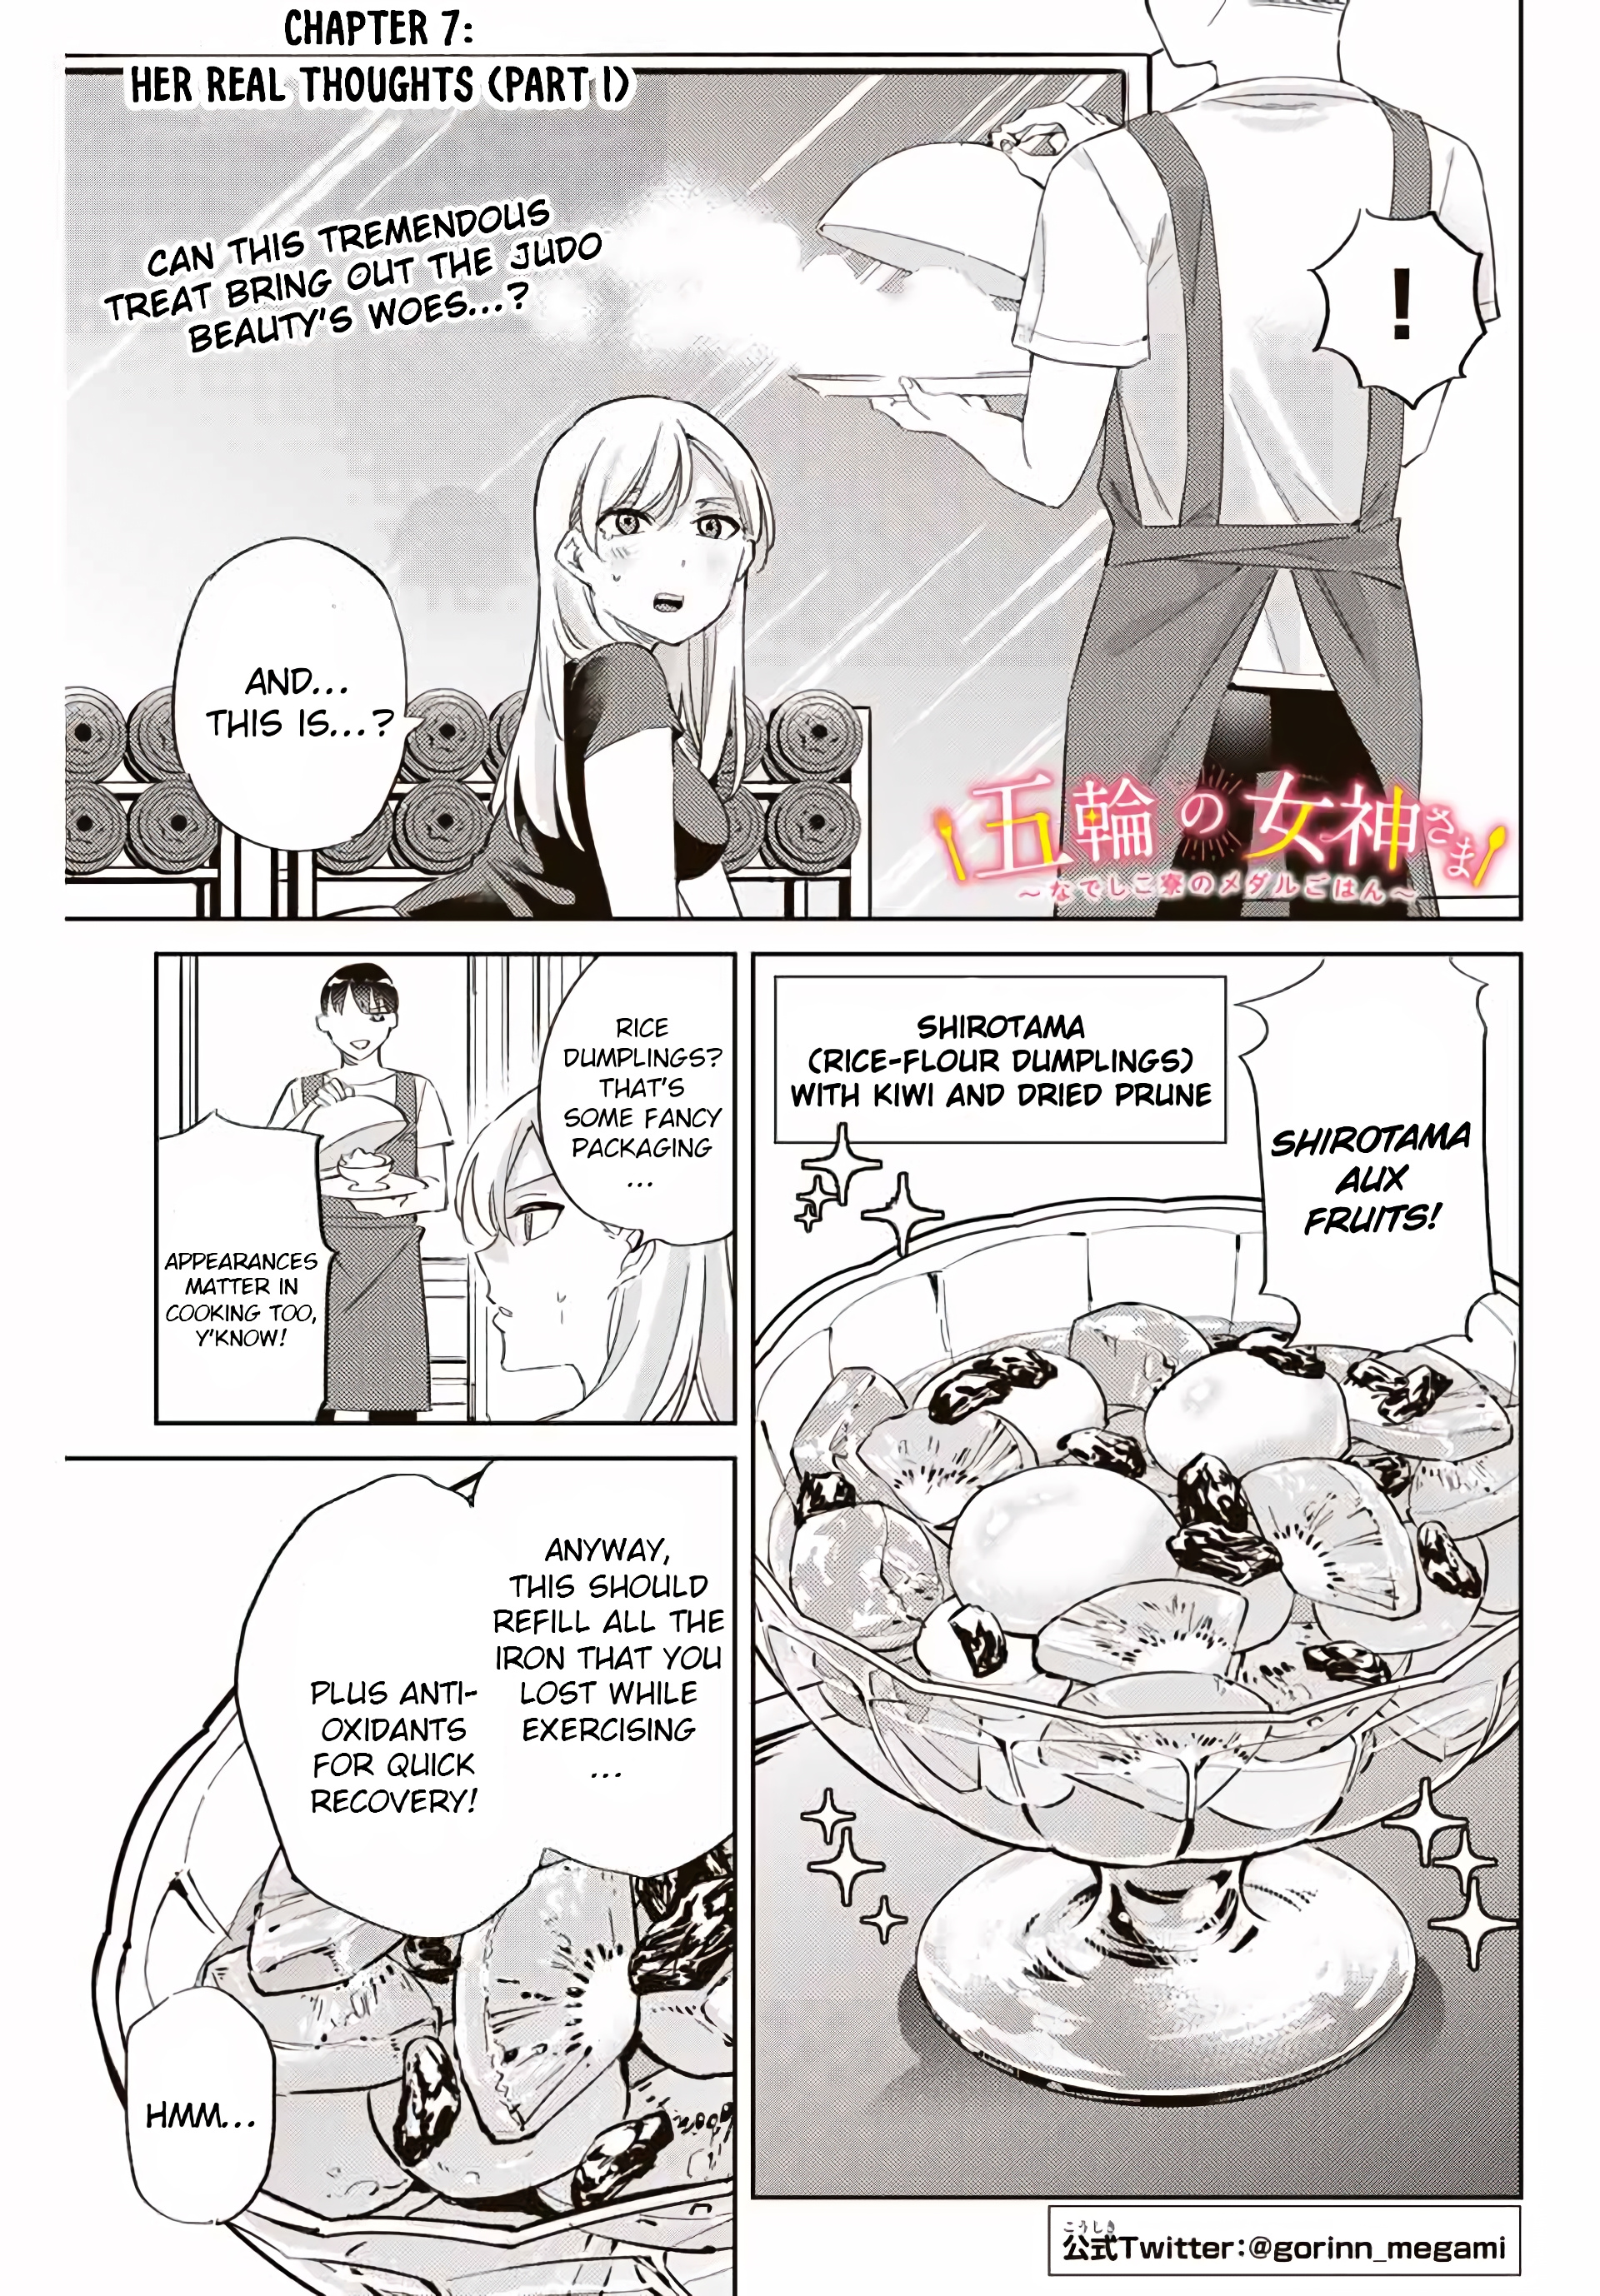 Gorin No Megami-Sama: Nedeshiko Ryou No Medal Gohan Chapter 7.1: Her Real Thoughts (Part 1) - Picture 2